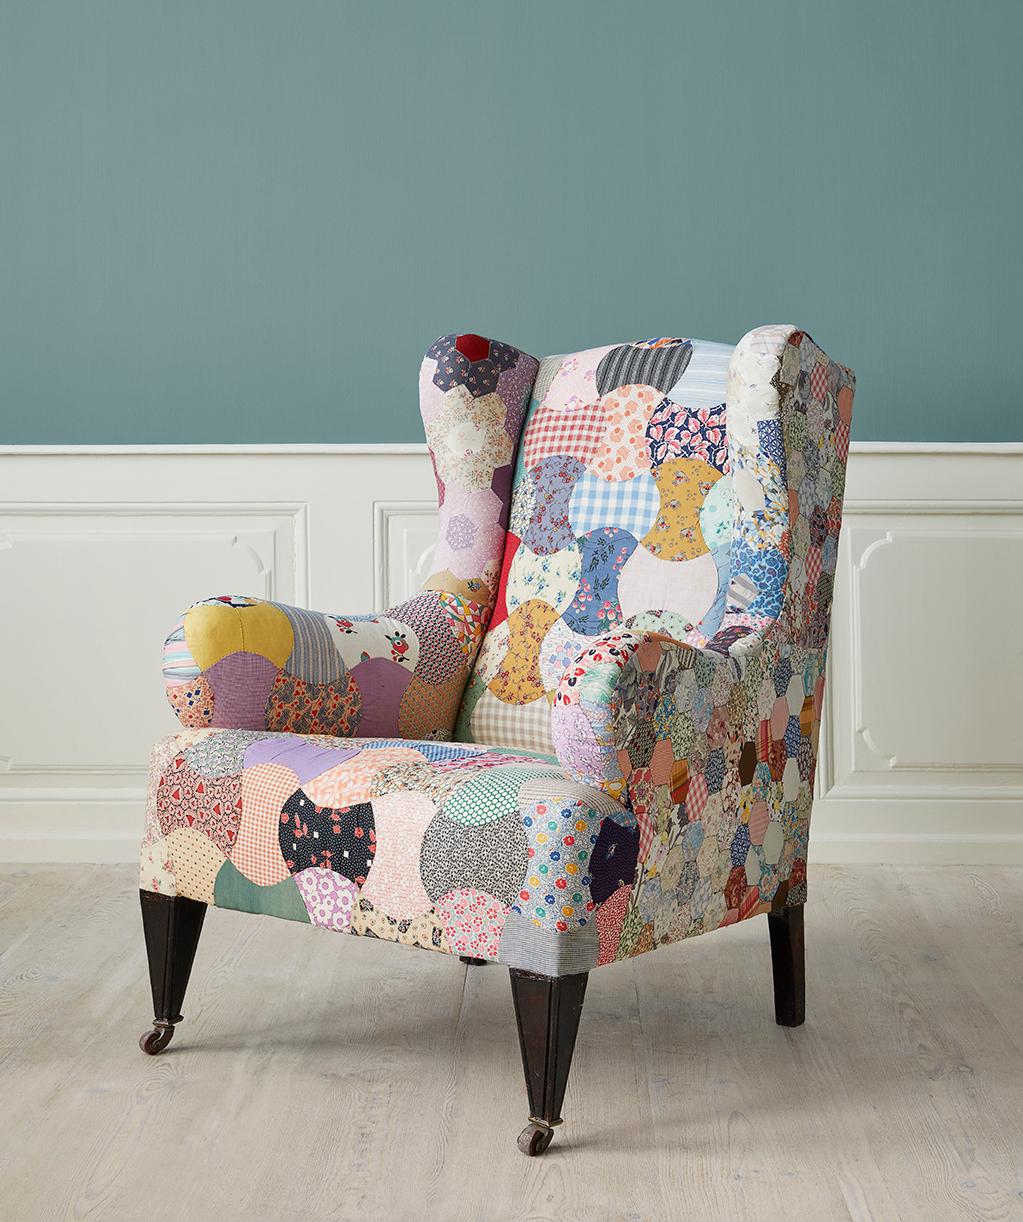 England, 20th century

Armchair with front wheels. Upholstered with patchwork in different colours and patterns. 

H 100 x W 75 x D 67, seat H43 cm.